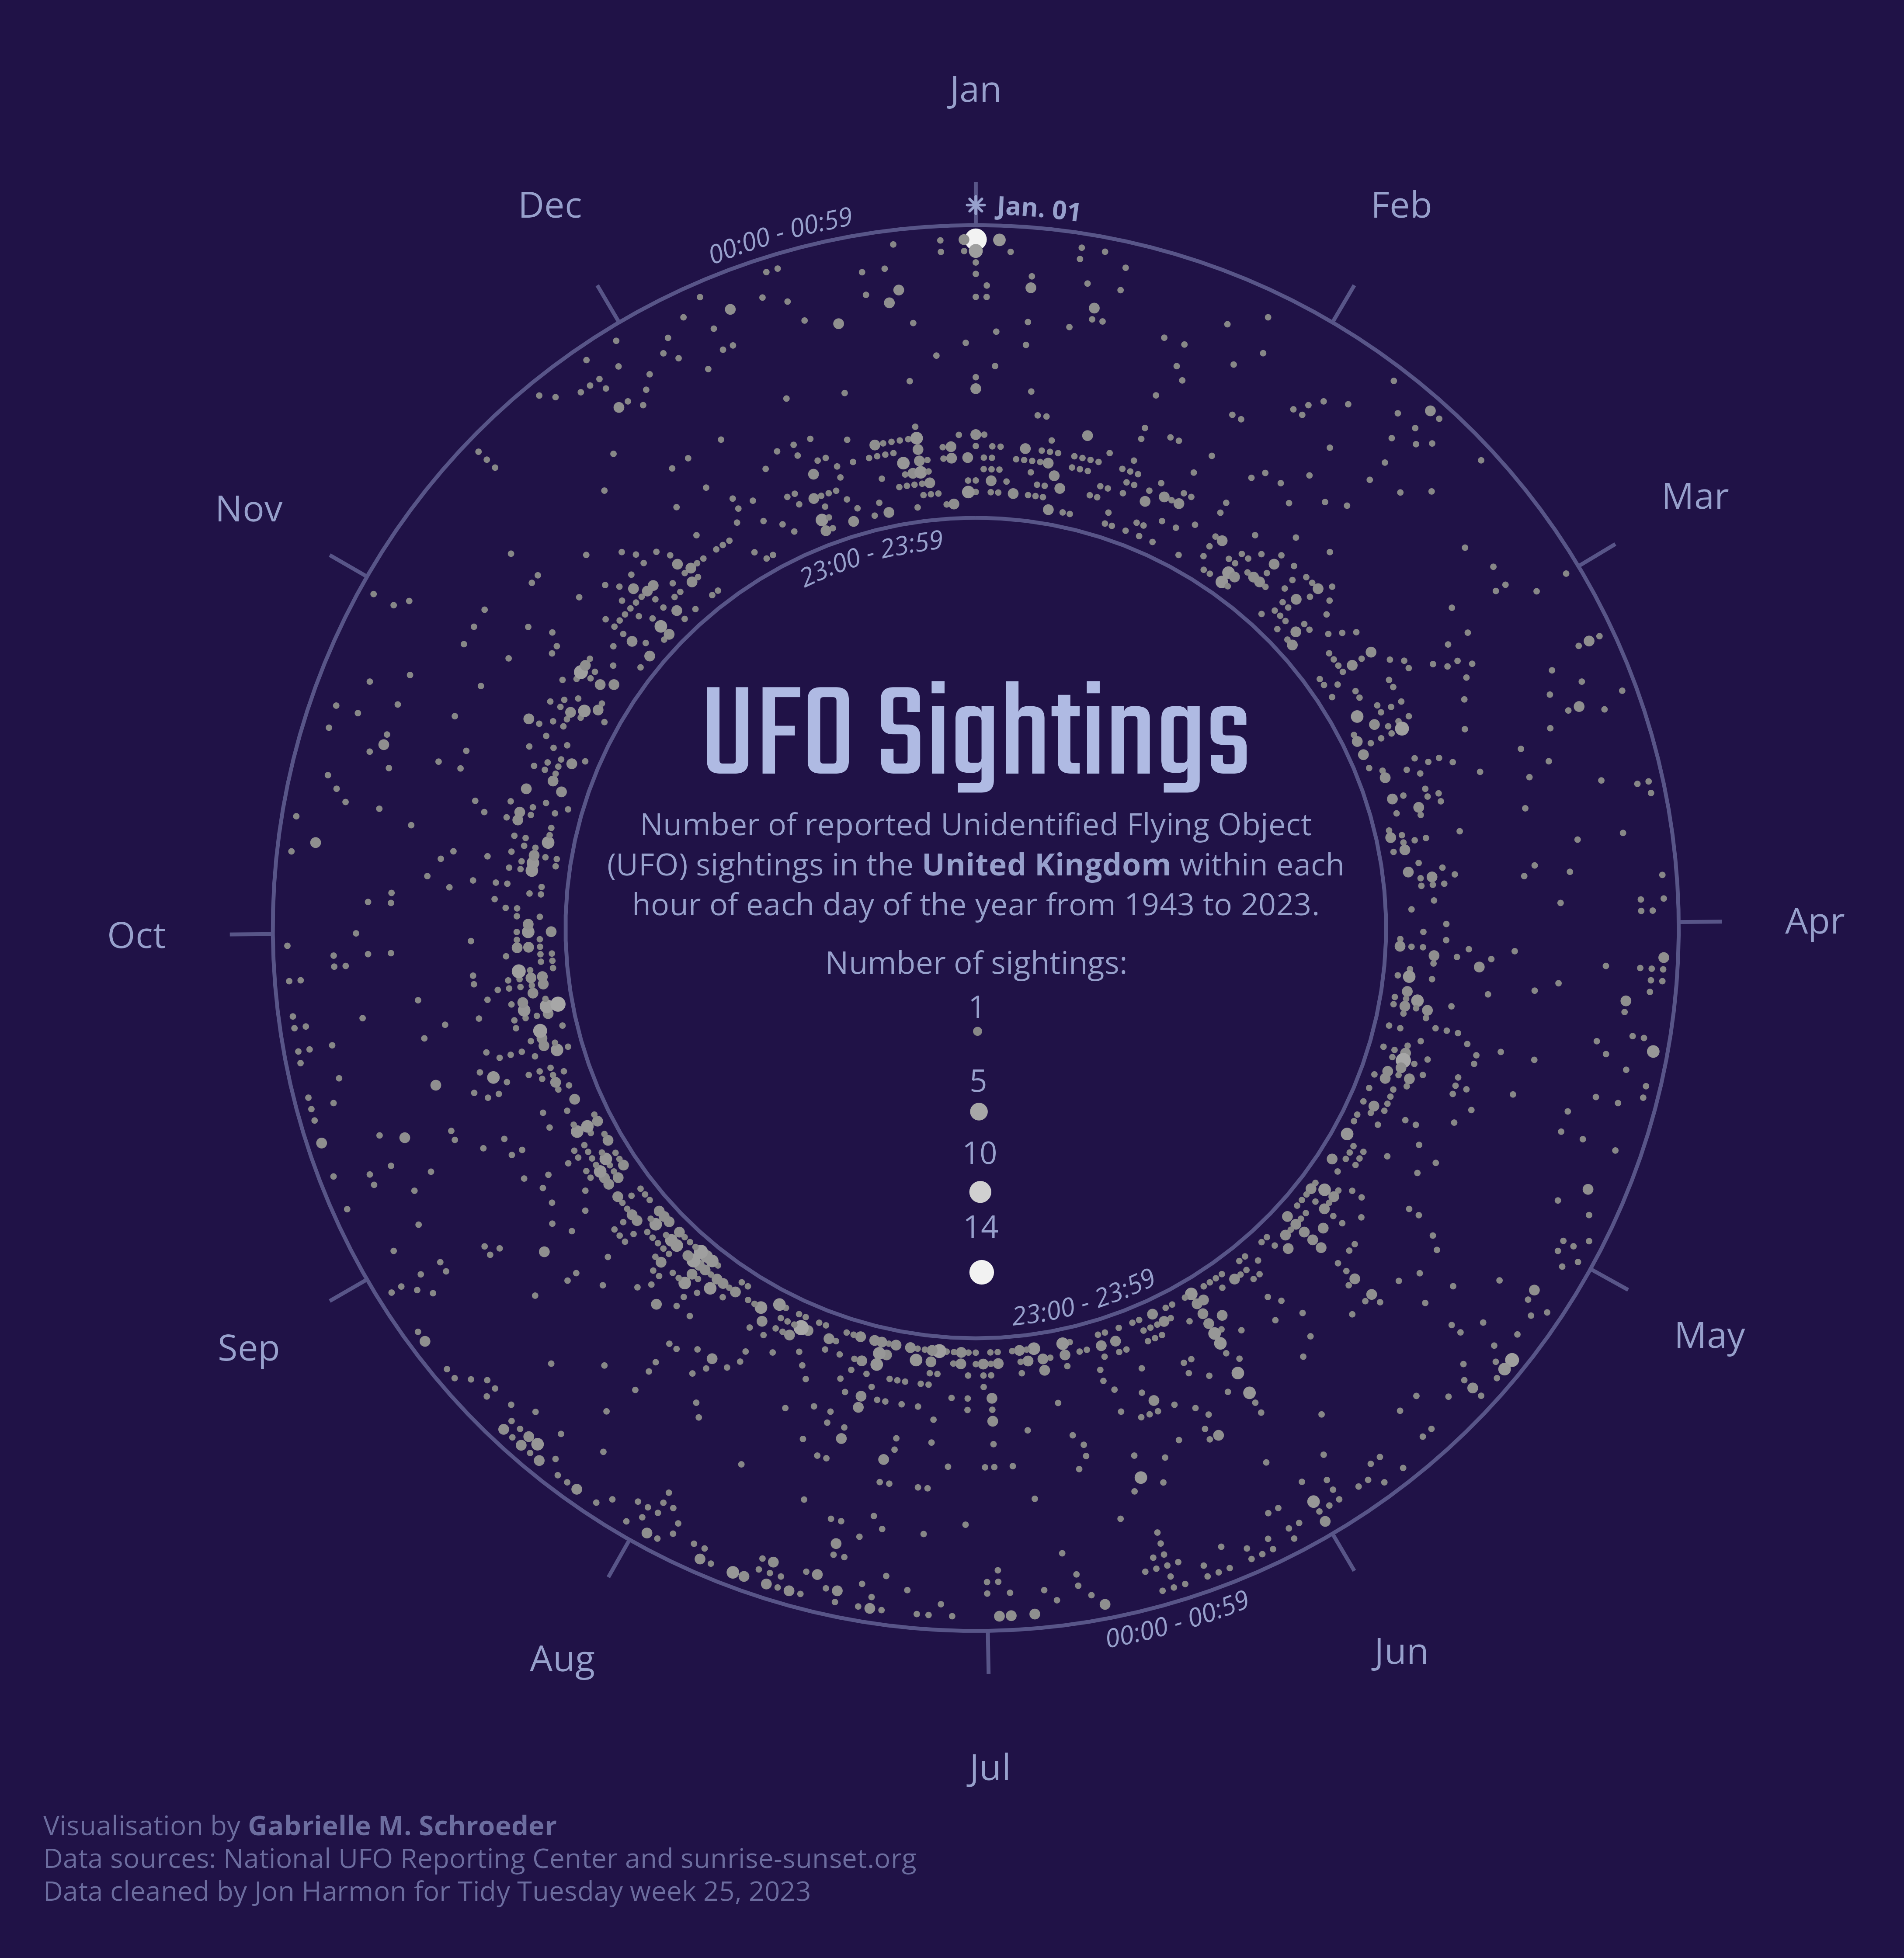 Bubble chart of the number of UFO sightings, shown by point size, in the United Kingdom during each hour of each day in the calendar year. Polar coordinates are used to place the days of the year on a circle, creating a donut shape. Sightings are more frequent during the last few hours (during summer) or several hours (during winter) of the day, and sightings are especially common in the first hour of Jan. 1.